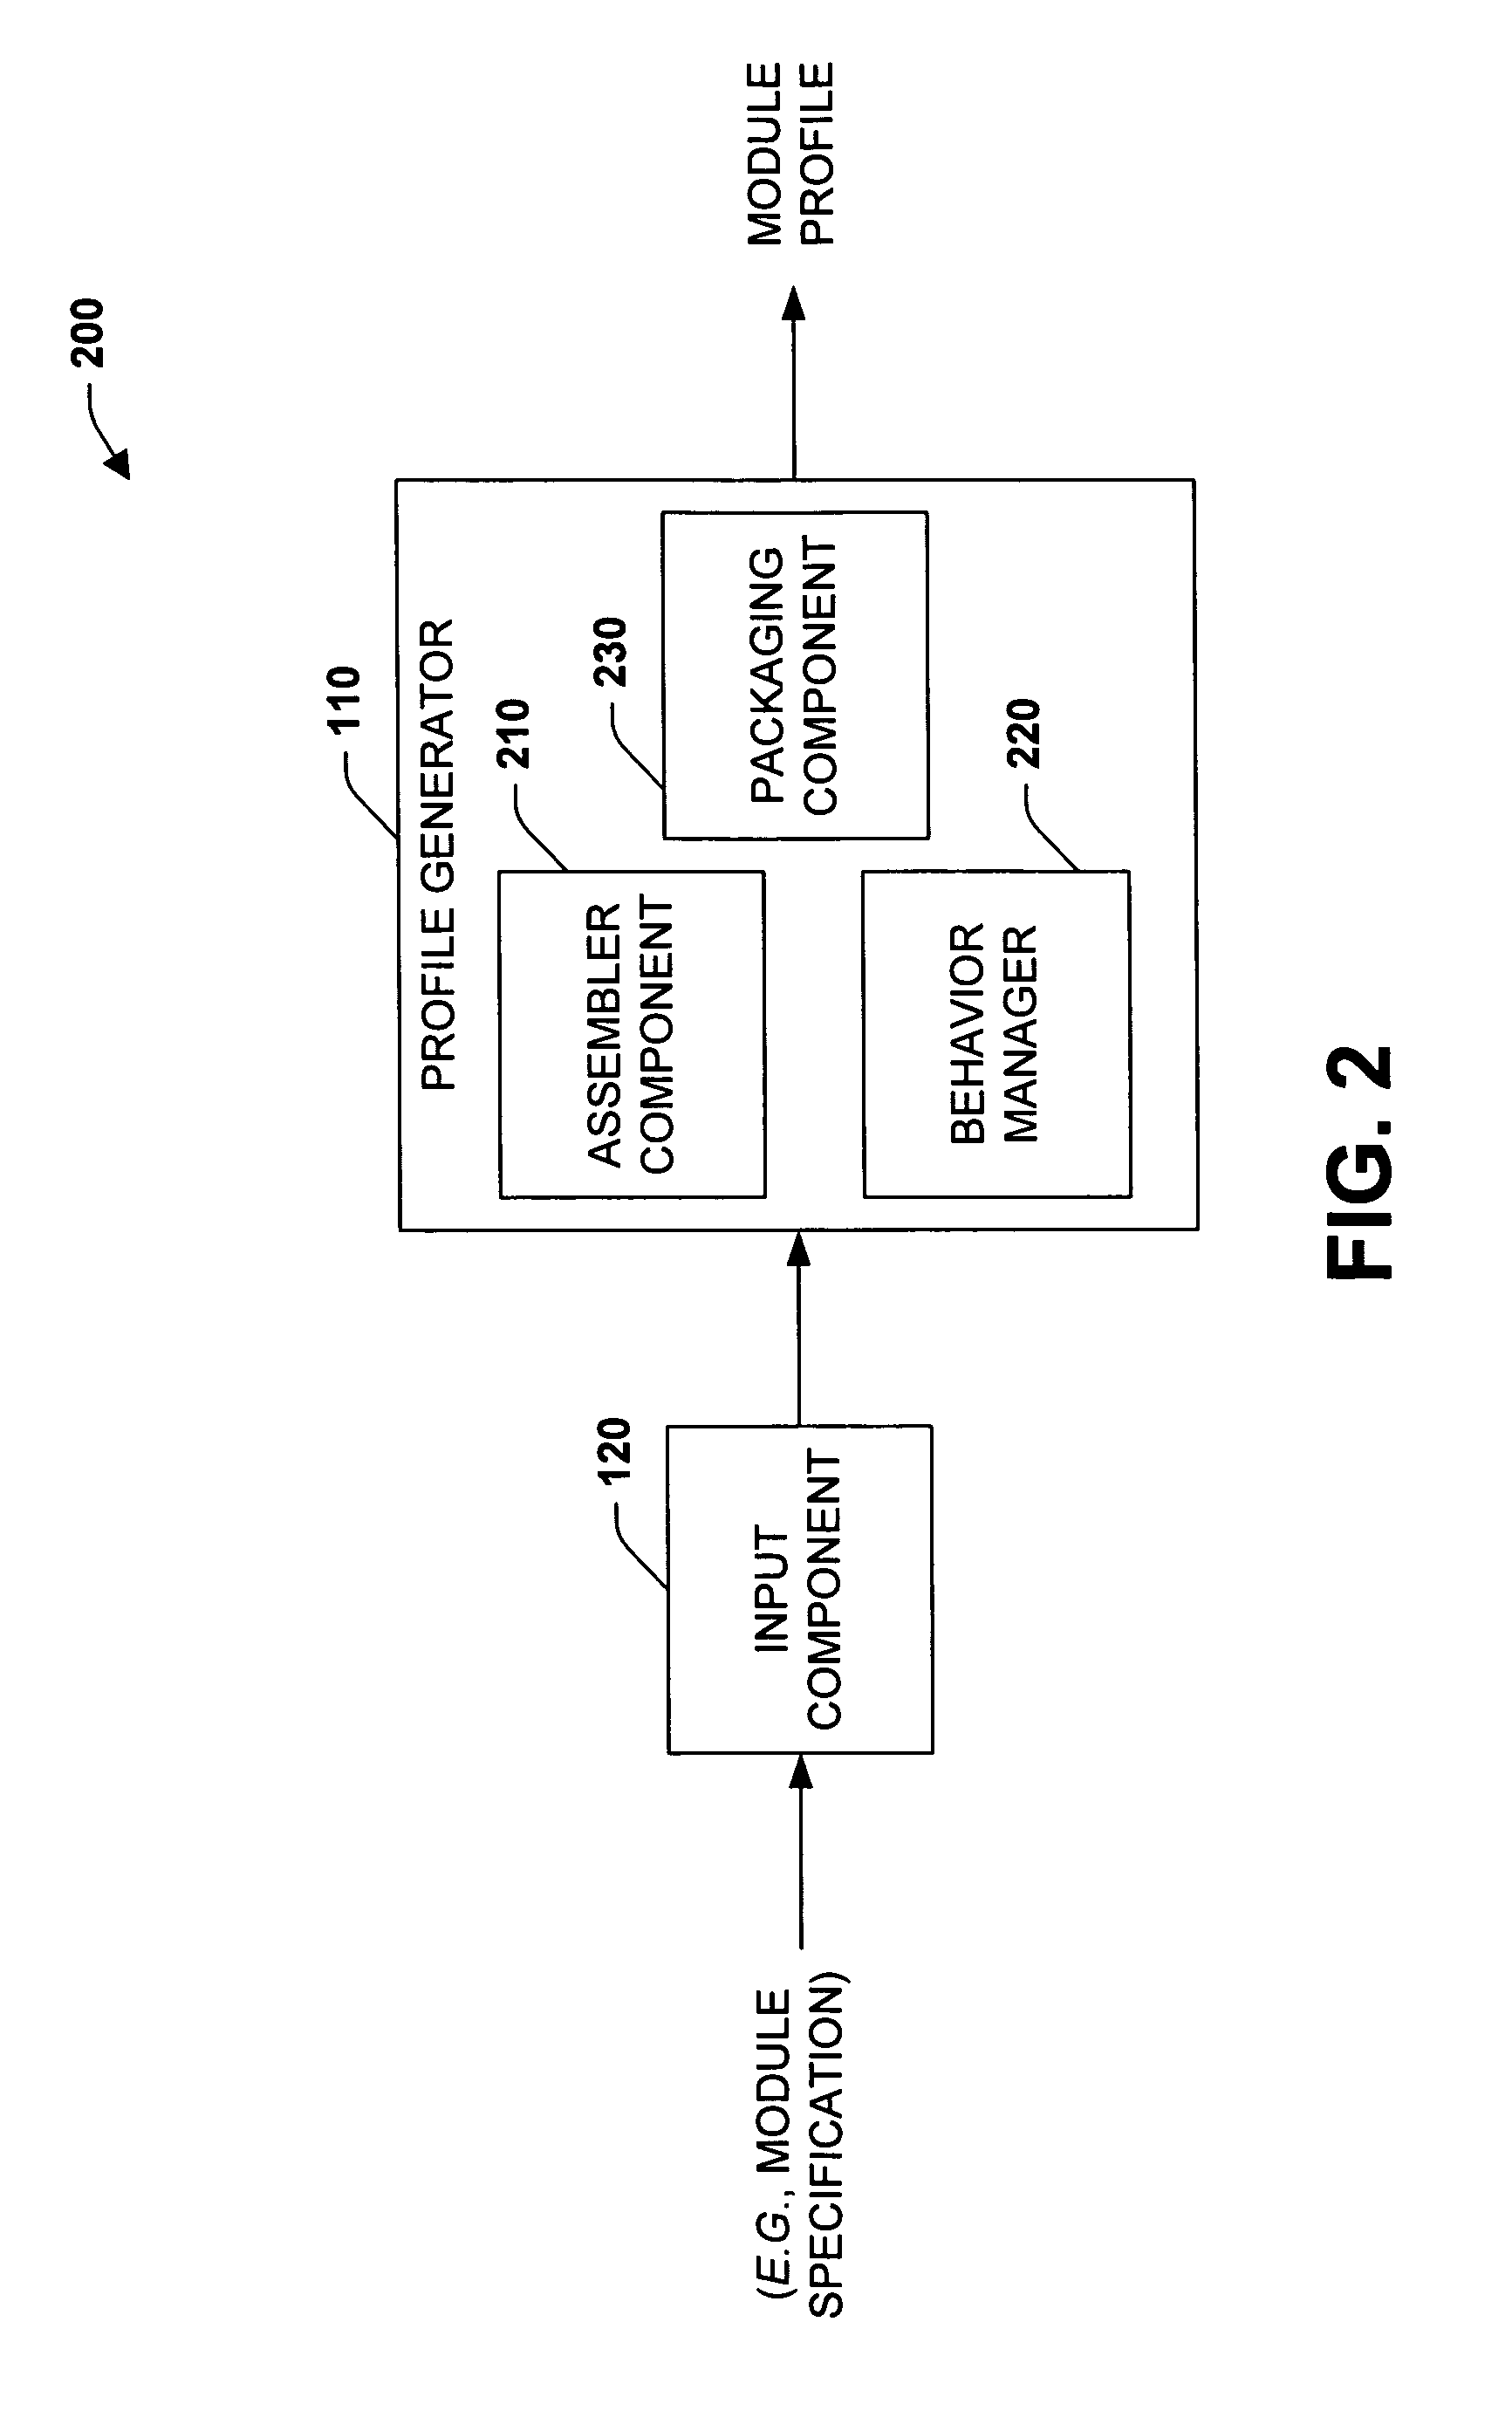 Systems and methods that employ an extensible architecture to define configuration functionality